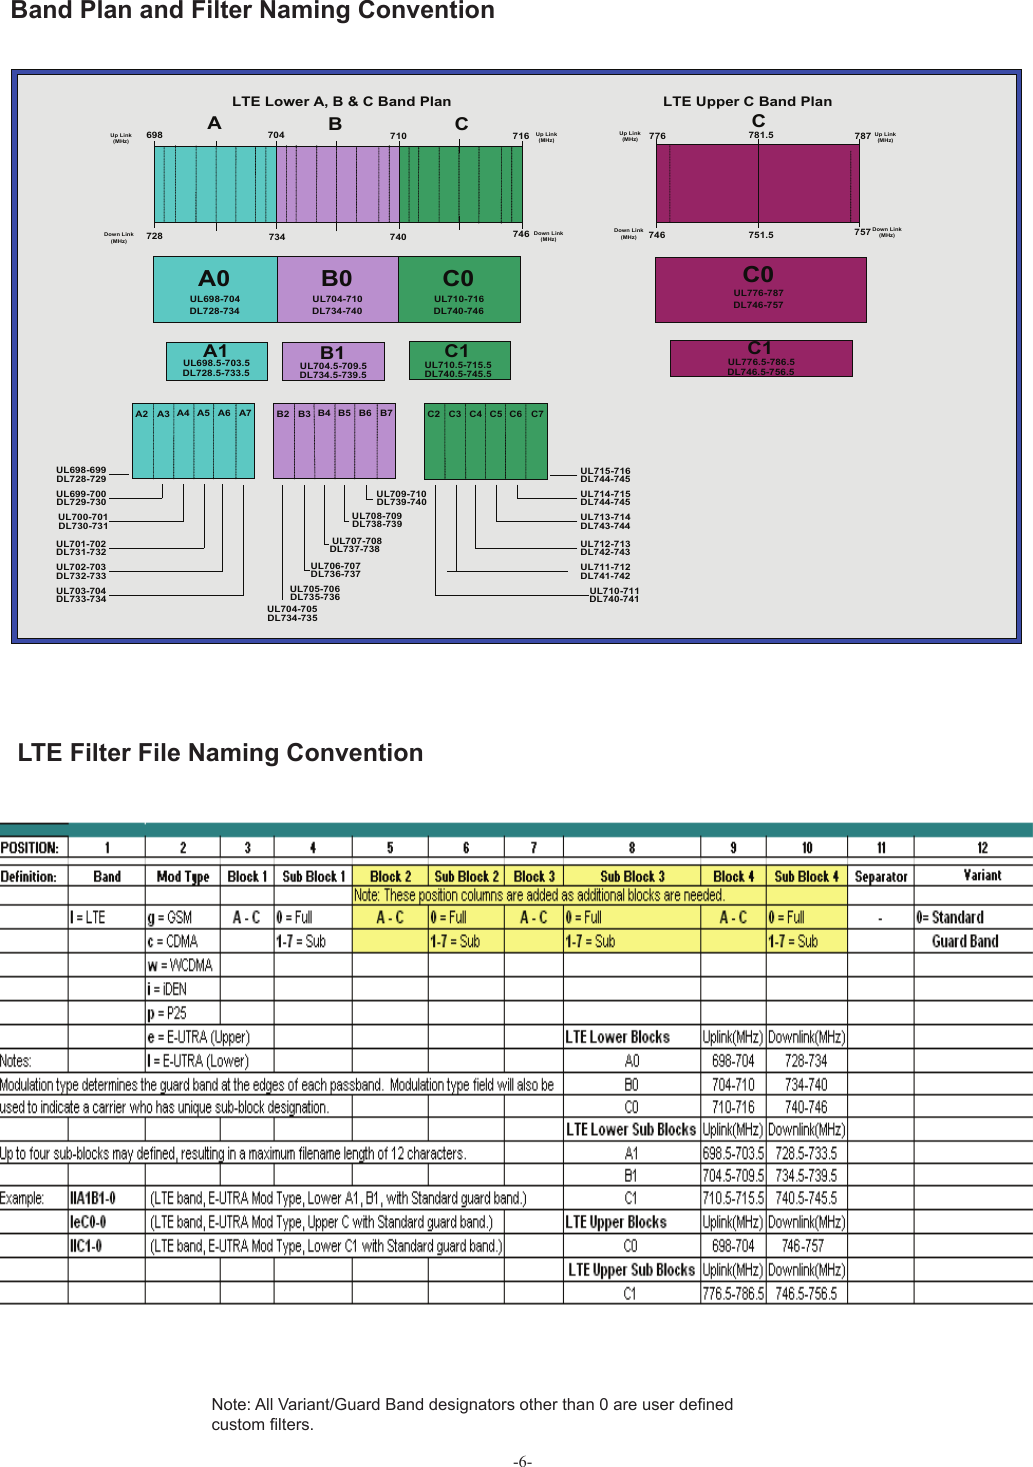  LTE Filter File Naming Convention-6-LTE Lower A, B &amp; C Band PlanUp Link (MHz)Down Link (MHz) 728698A0UL698-704DL728-734B0UL704-710DL734-740A1UL698.5-703.5DL728.5-733.5B1UL704.5-709.5DL734.5-739.5AB704 710734 740Up Link (MHz)Down Link (MHz)A2 A3 A4 A5 A6 A7UL698-699DL728-729UL699-700DL729-730UL700-701DL730-731UL701-702DL731-732UL702-703DL732-733UL703-704DL733-734B2 B3 B4 B5 B6 B7UL704-705DL734-735UL705-706DL735-736UL706-707DL736-737UL707-708DL737-738UL708-709DL738-739UL709-710DL739-740746716CC0UL710-716DL740-746C1UL710.5-715.5DL740.5-745.5C7C6C5C4C3C2UL715-716DL744-745UL714-715DL744-745UL713-714DL743-744UL712-713DL742-743UL711-712DL741-742UL710-711DL740-741LTE Upper C Band PlanUp Link (MHz)Down Link (MHz) 746776C0UL776-787DL746-757C1UL776.5-786.5DL746.5-756.5C787757Up Link (MHz)Down Link (MHz)781.5751.5Note: All Variant/Guard Band designators other than 0 are user deﬁ ned custom ﬁ lters.Band Plan and Filter Naming Convention